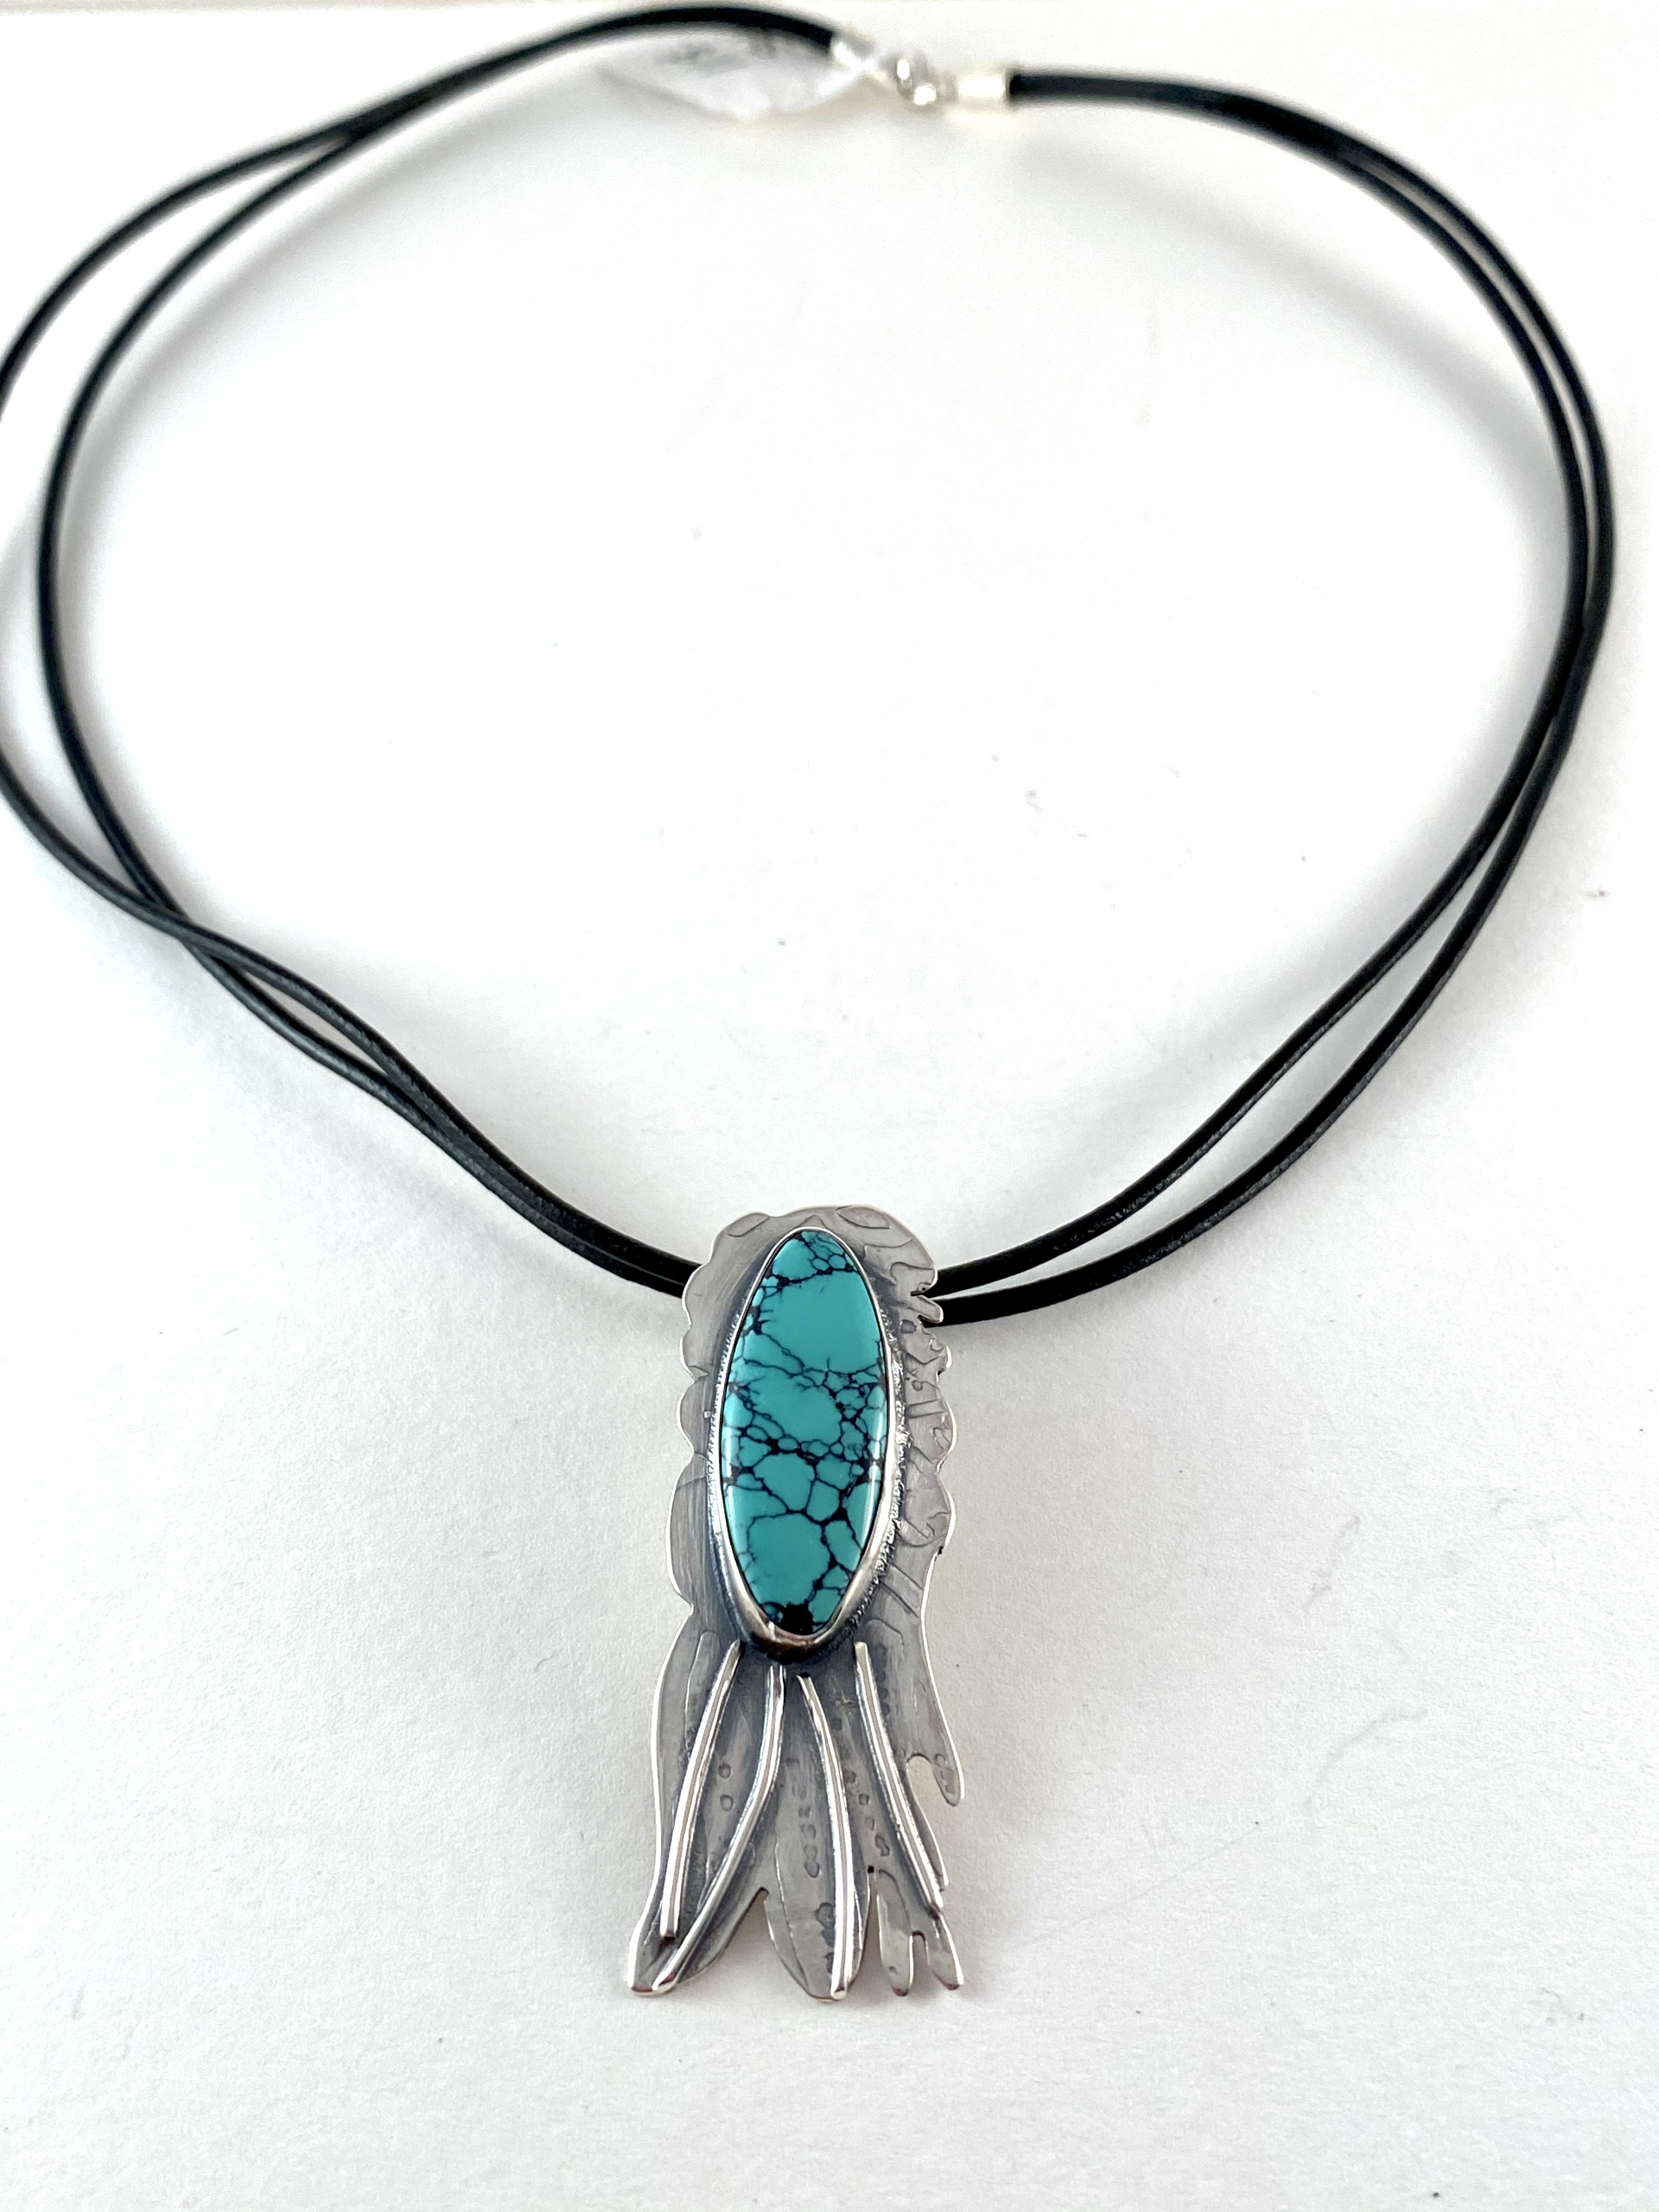 #130 Silver and Kingman Turquoise Pendant on double leather cord by Anne Bivens